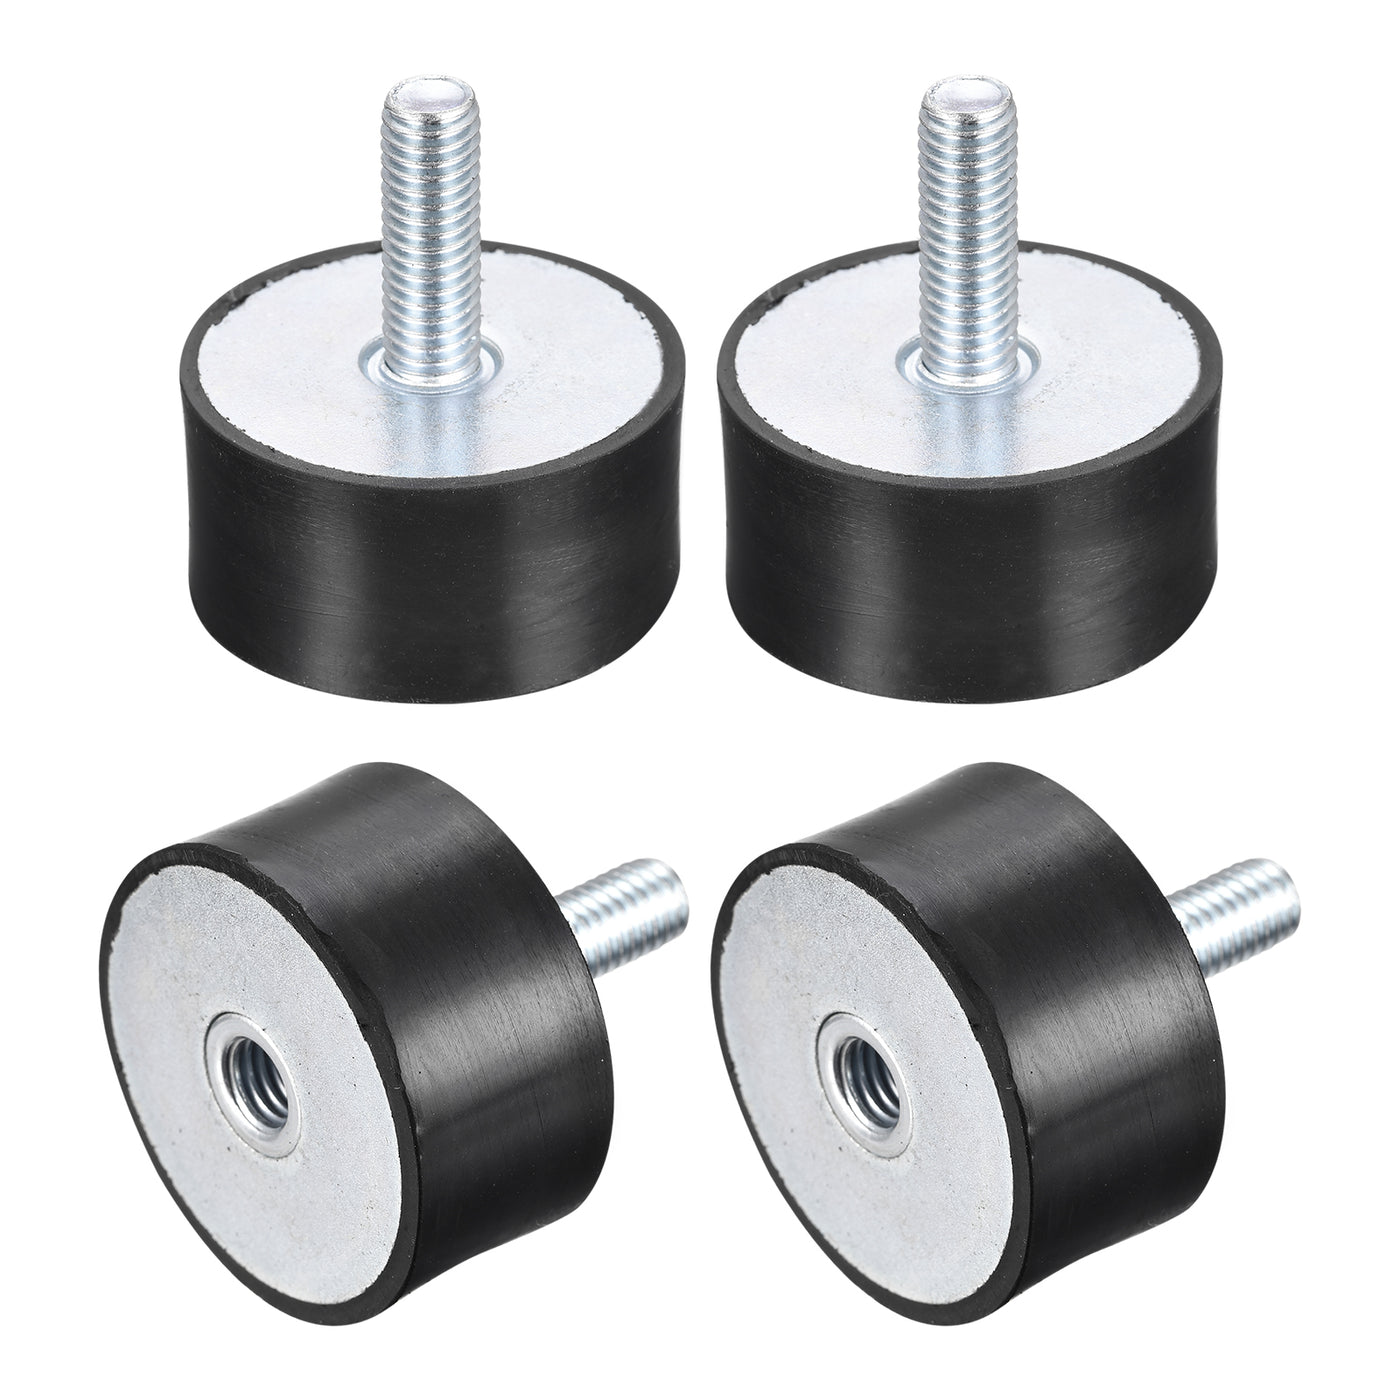 uxcell Uxcell Rubber Mounts 4pcs M8 Male/Female Vibration Isolator Shock Absorber D40mmxH20mm